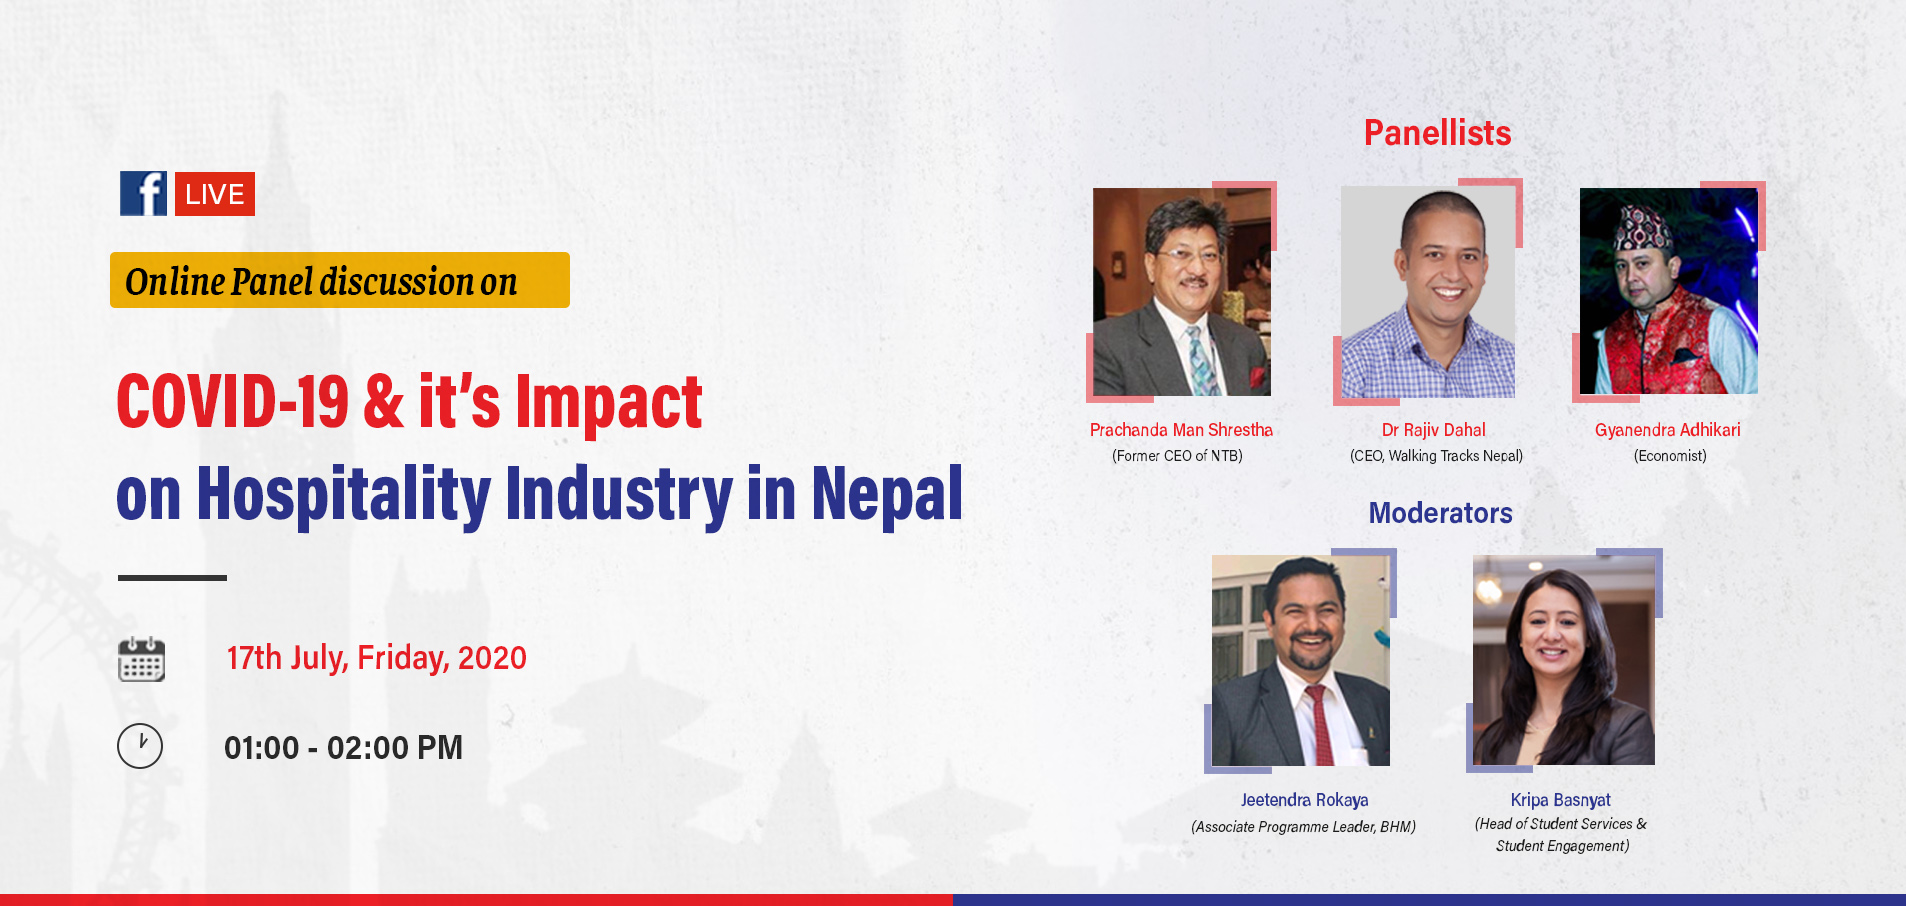 COVID 19 AND ITS IMPACT ON THE HOSPITALITY INDUSTRY IN NEPAL